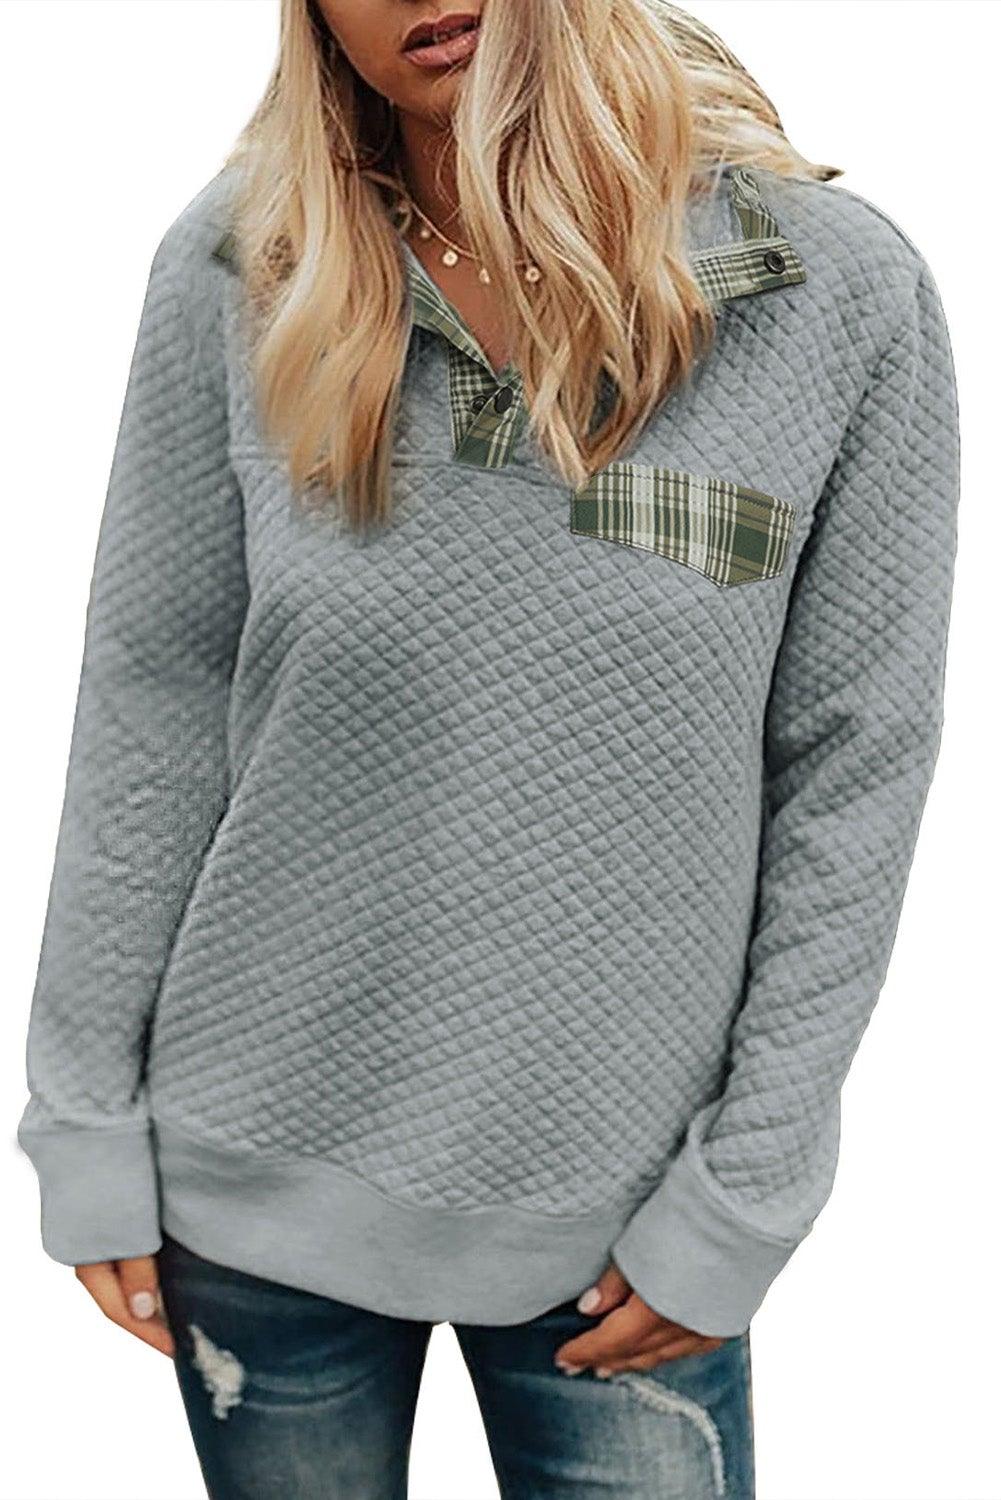 Plaid Splicing Elbow Patch Quilted Long Sleeve Sweatshirt - L & M Kee, LLC